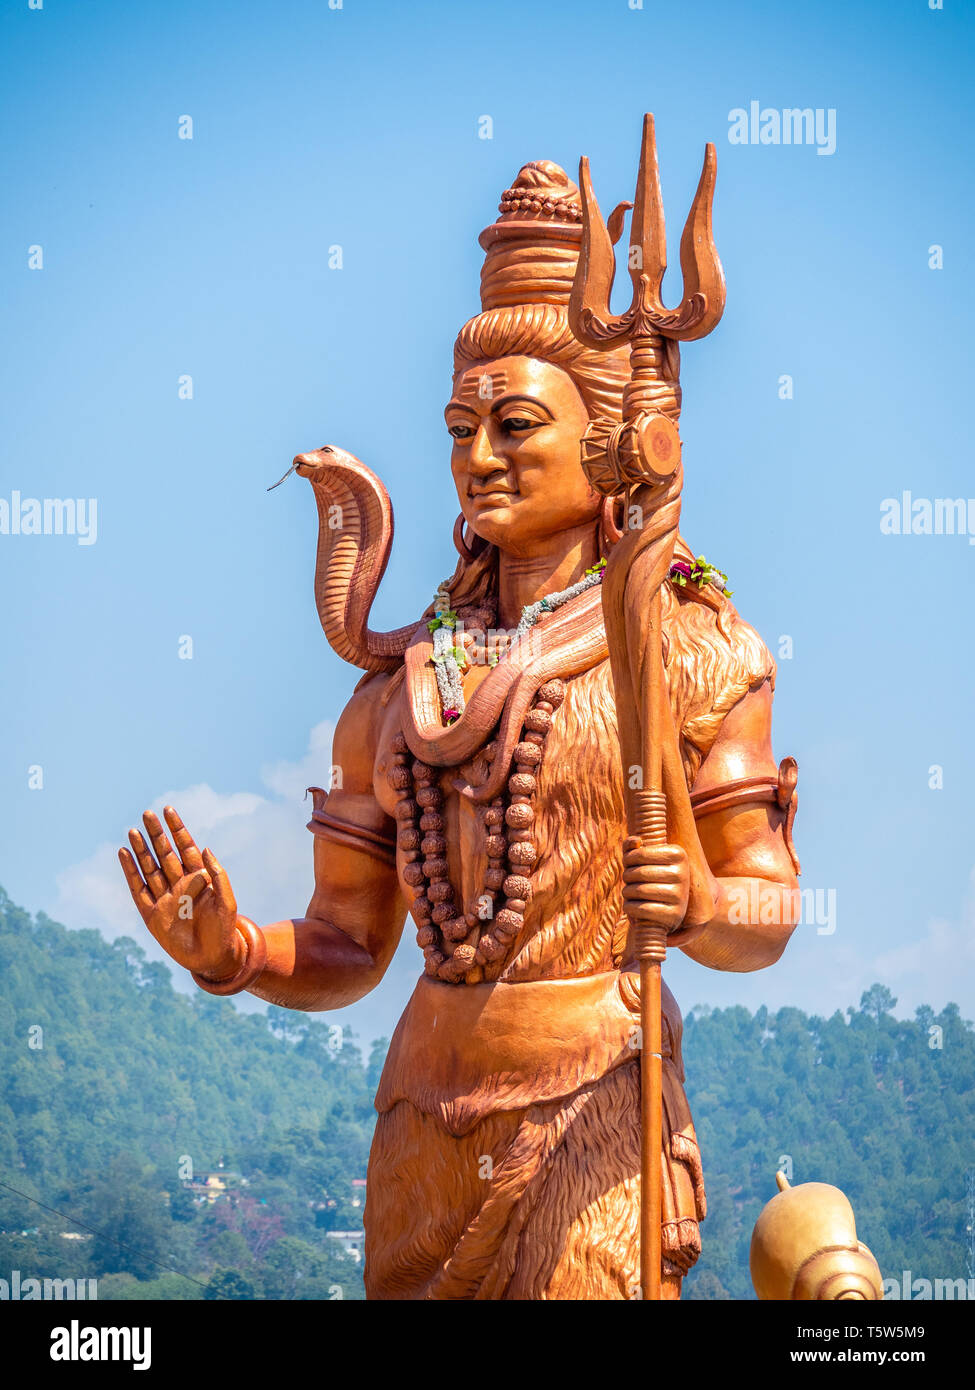 Enormous statue of Lord Shiva or Mahadeva the great Hindu god at Bagnath Temple Bageshwar at confluence of Saryu and Gomati rivers in Northern India Stock Photo